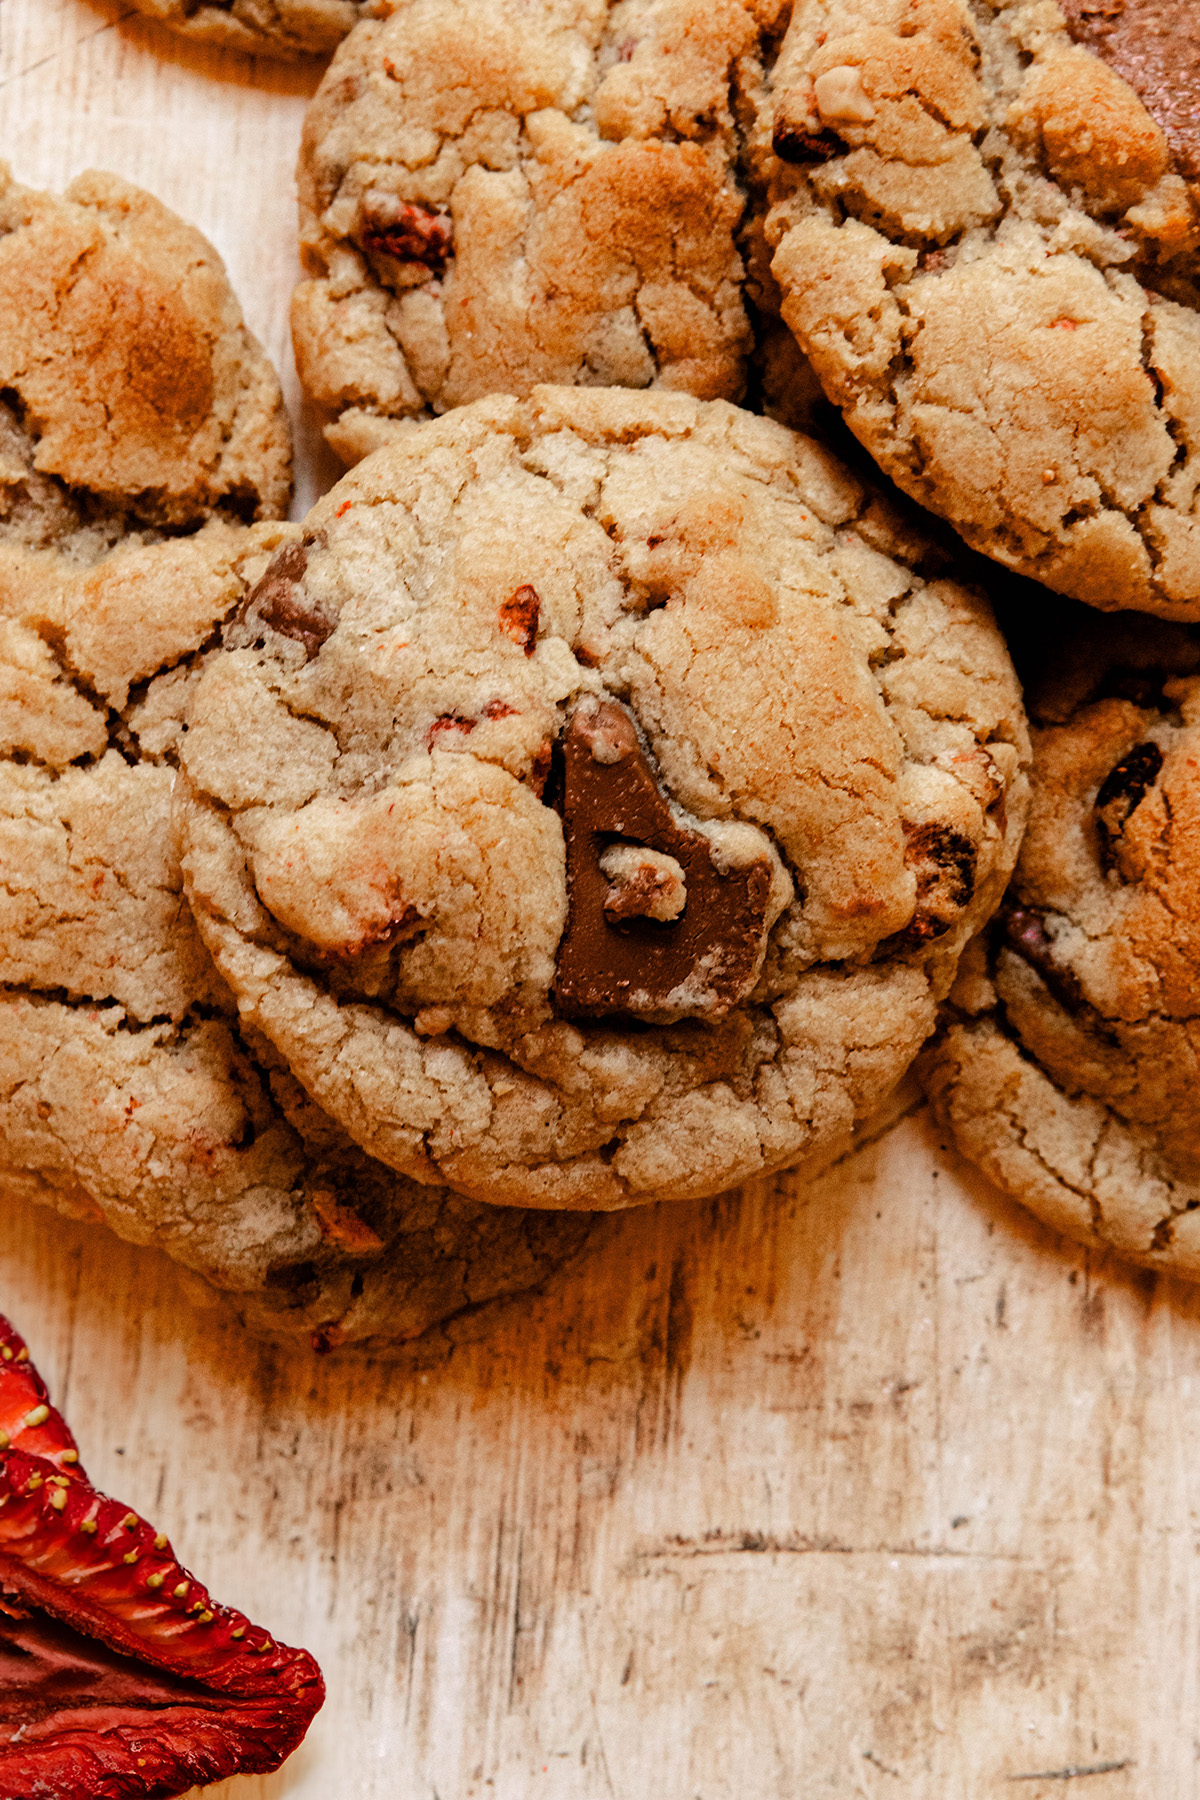 Miso Cookies With Brown Butter, Chocolate, & Strawberry